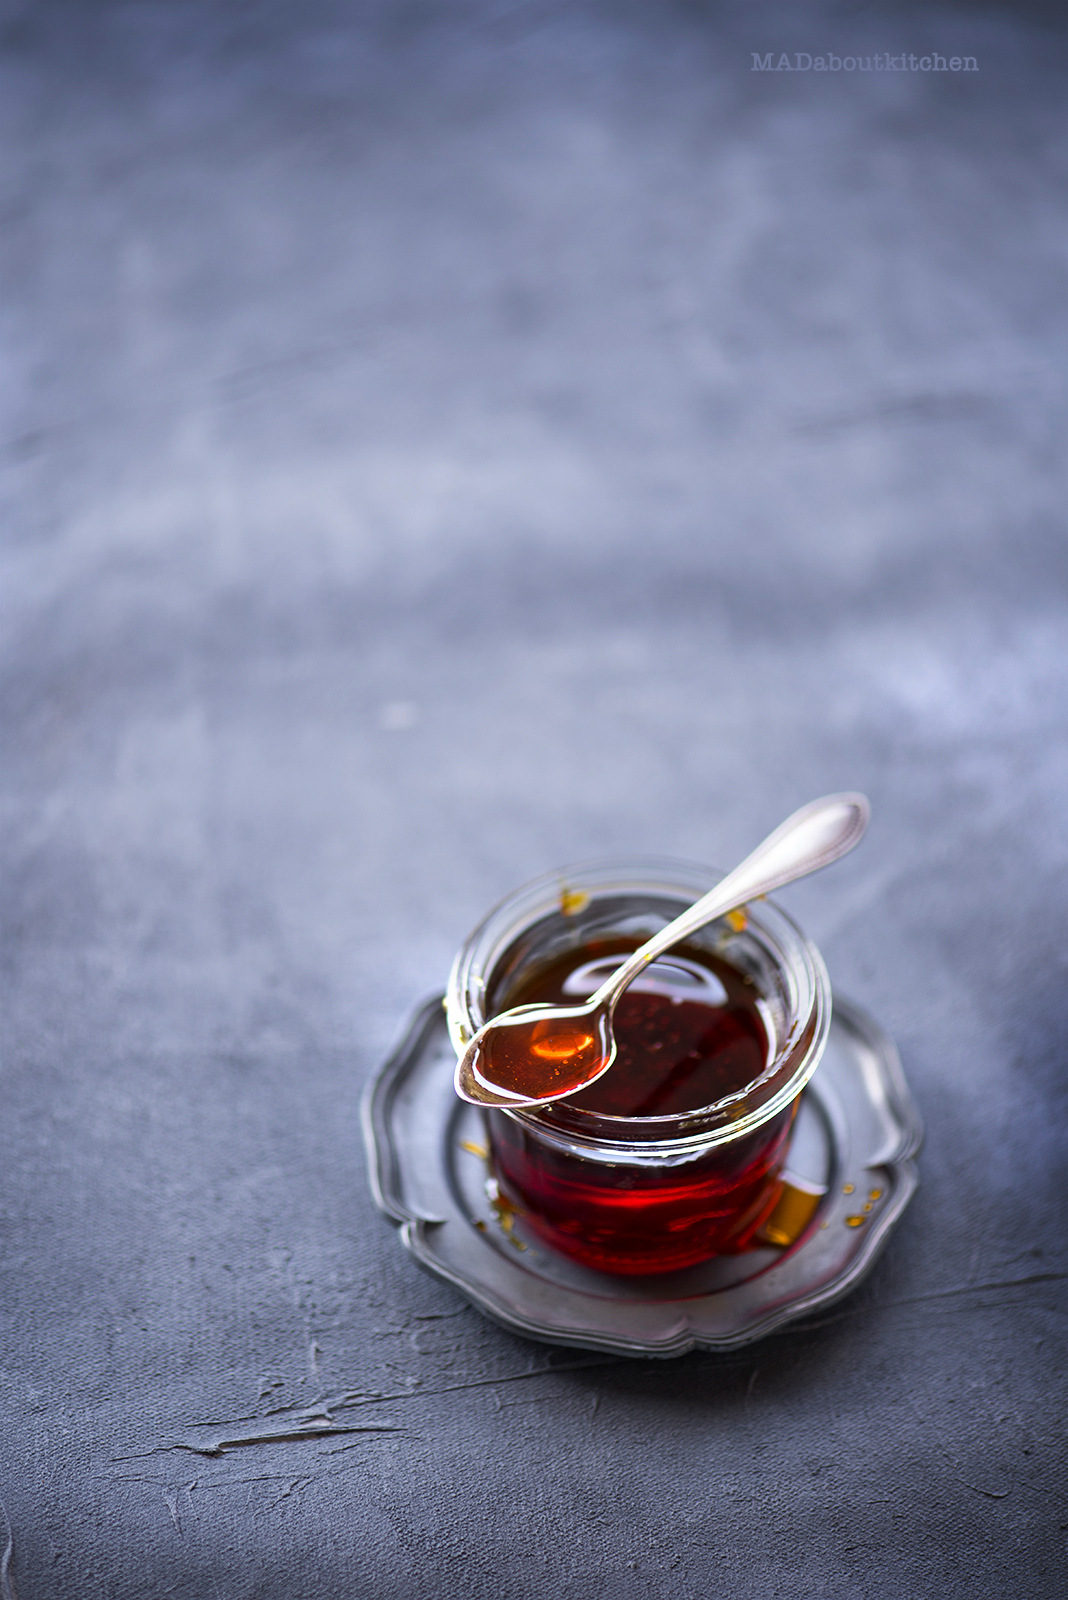 Caramel Syrup, is made by caramelising sugar. Caramel Syrup resembles Honey or Maple Syrup and is a basic syrup that is vastly used in desserts.